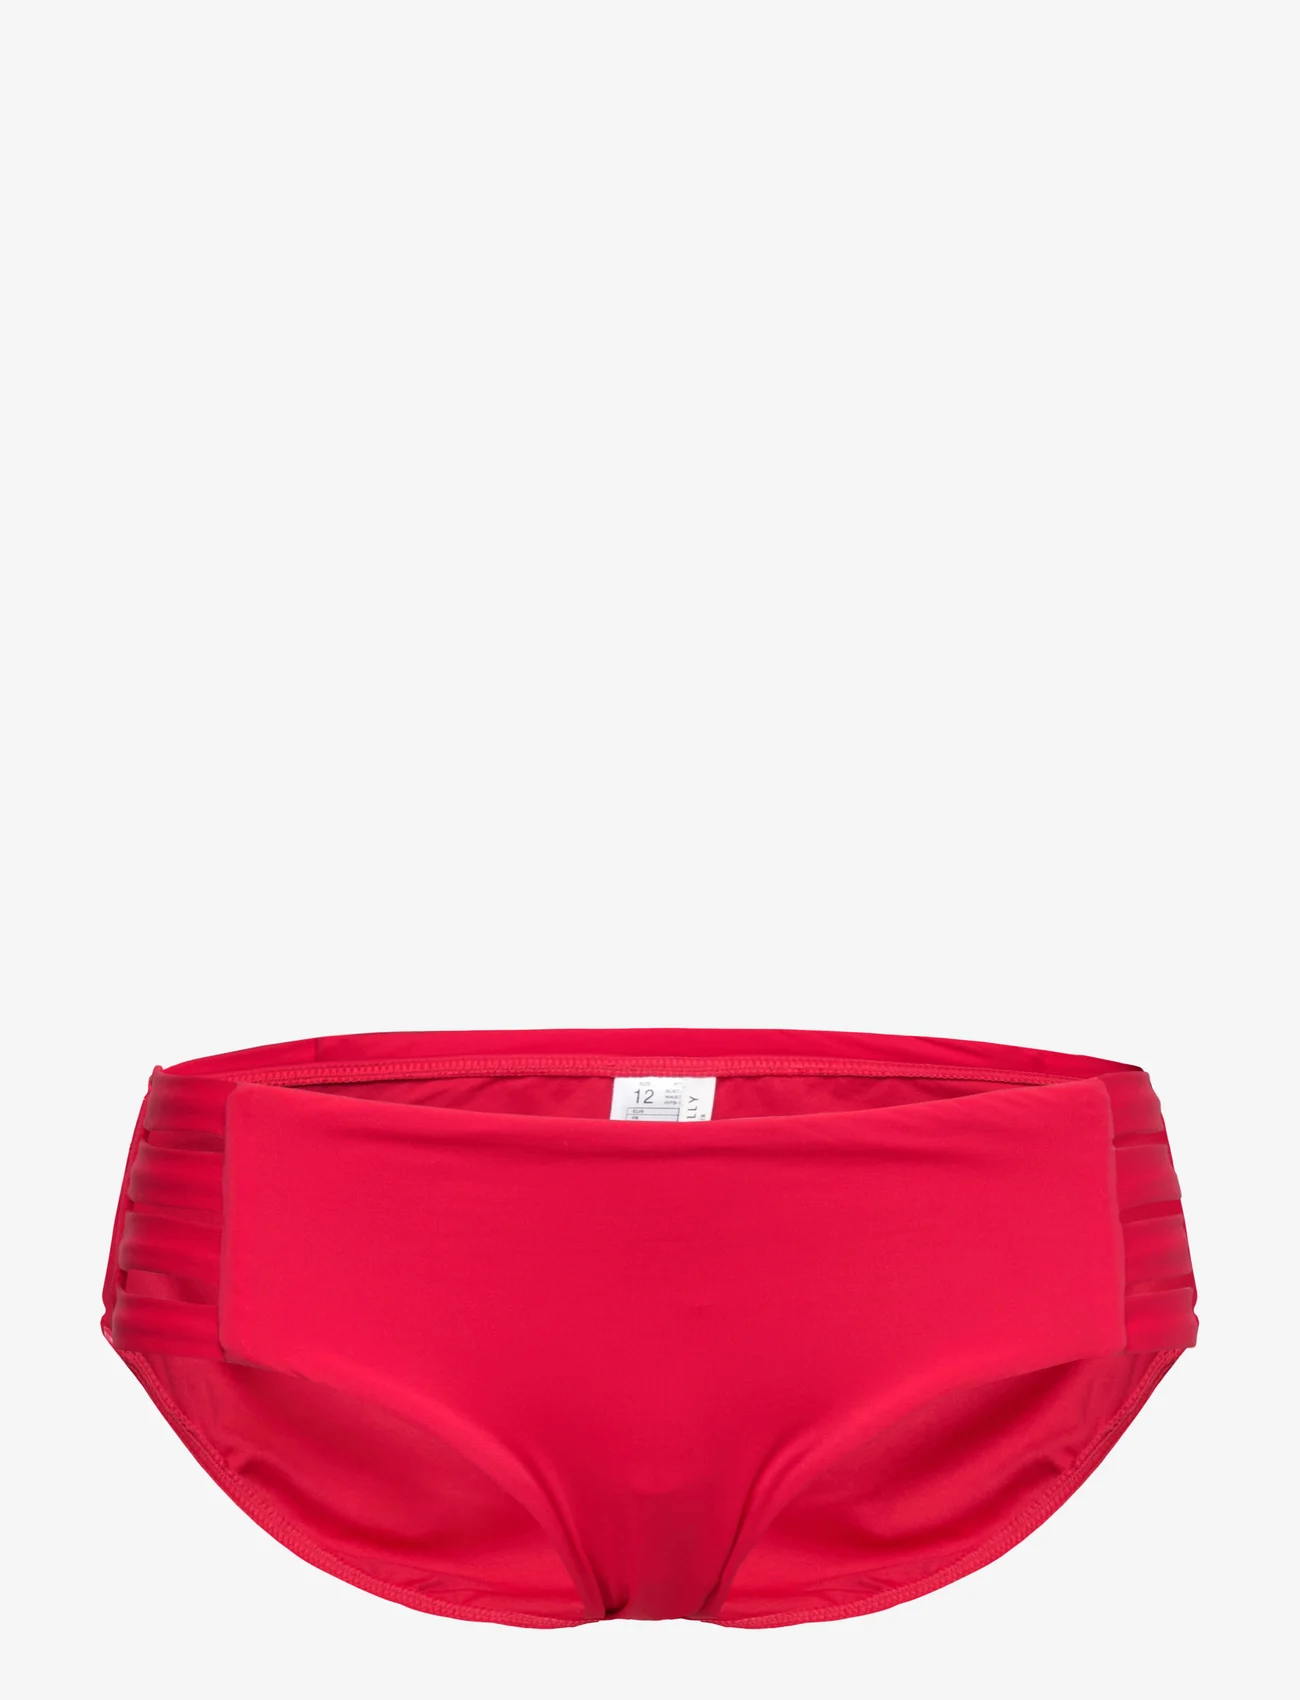 Seafolly - S.Collective Multi Strap Hipster Pant - bikini-slips - chilli red - 0